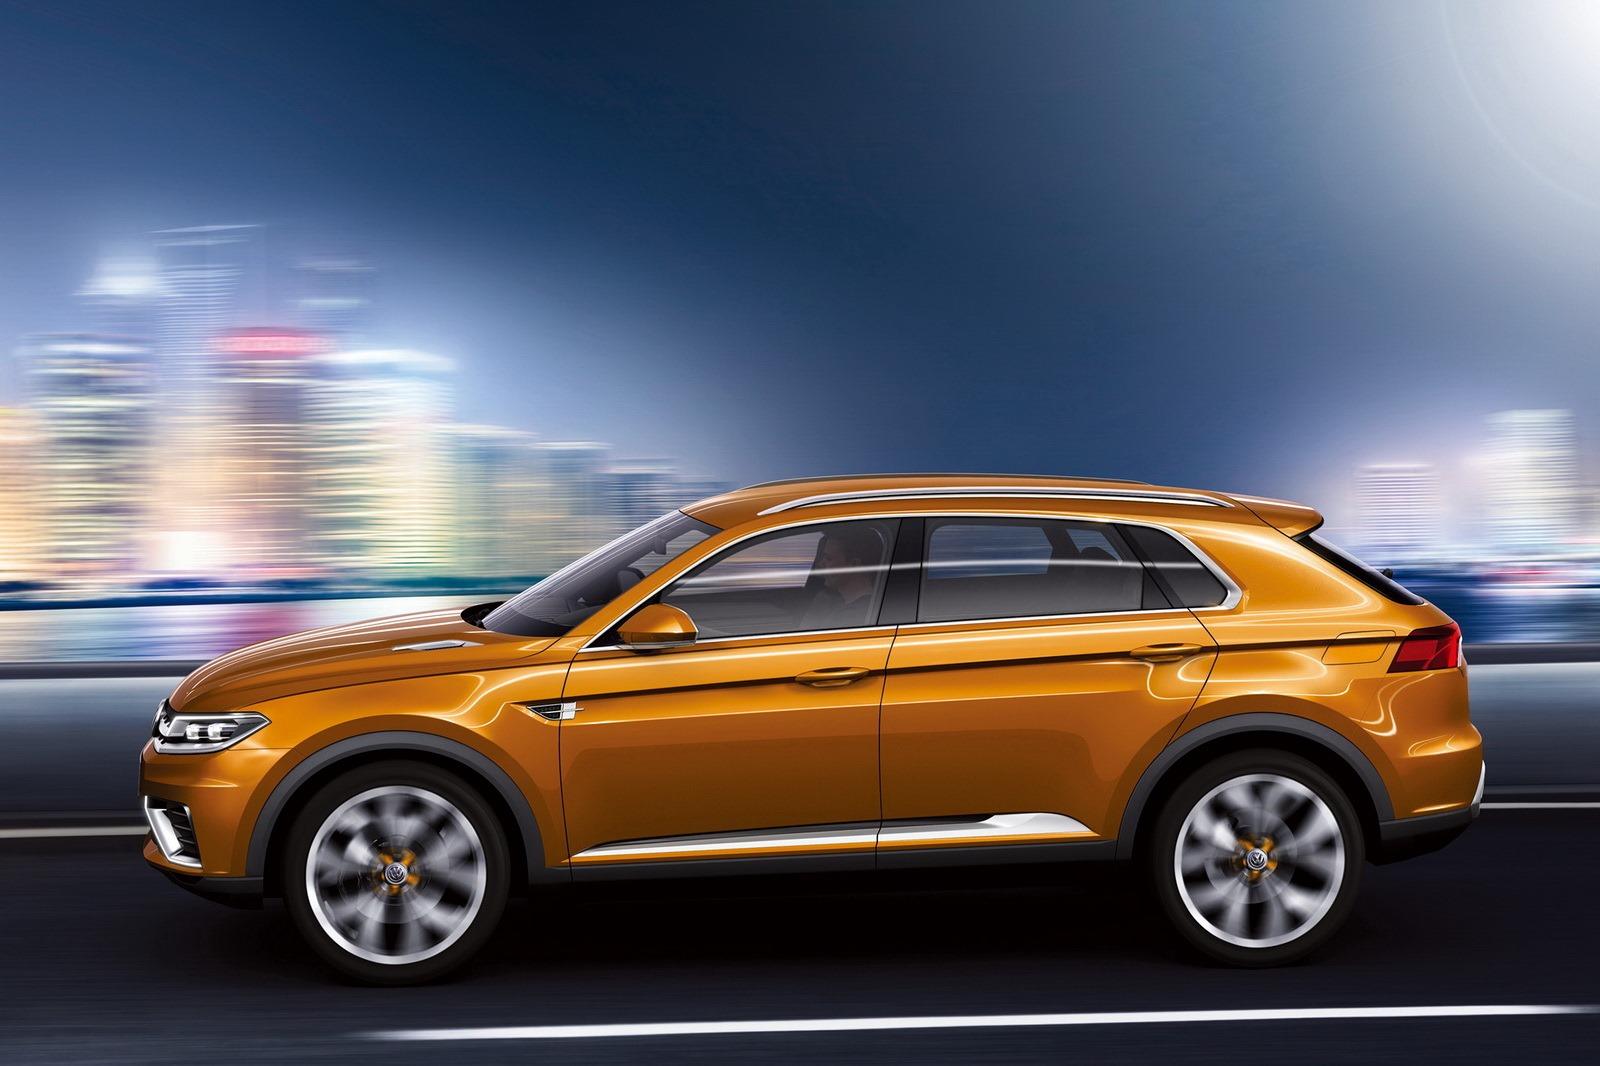 Volkswagen Crossblue Coupe concept